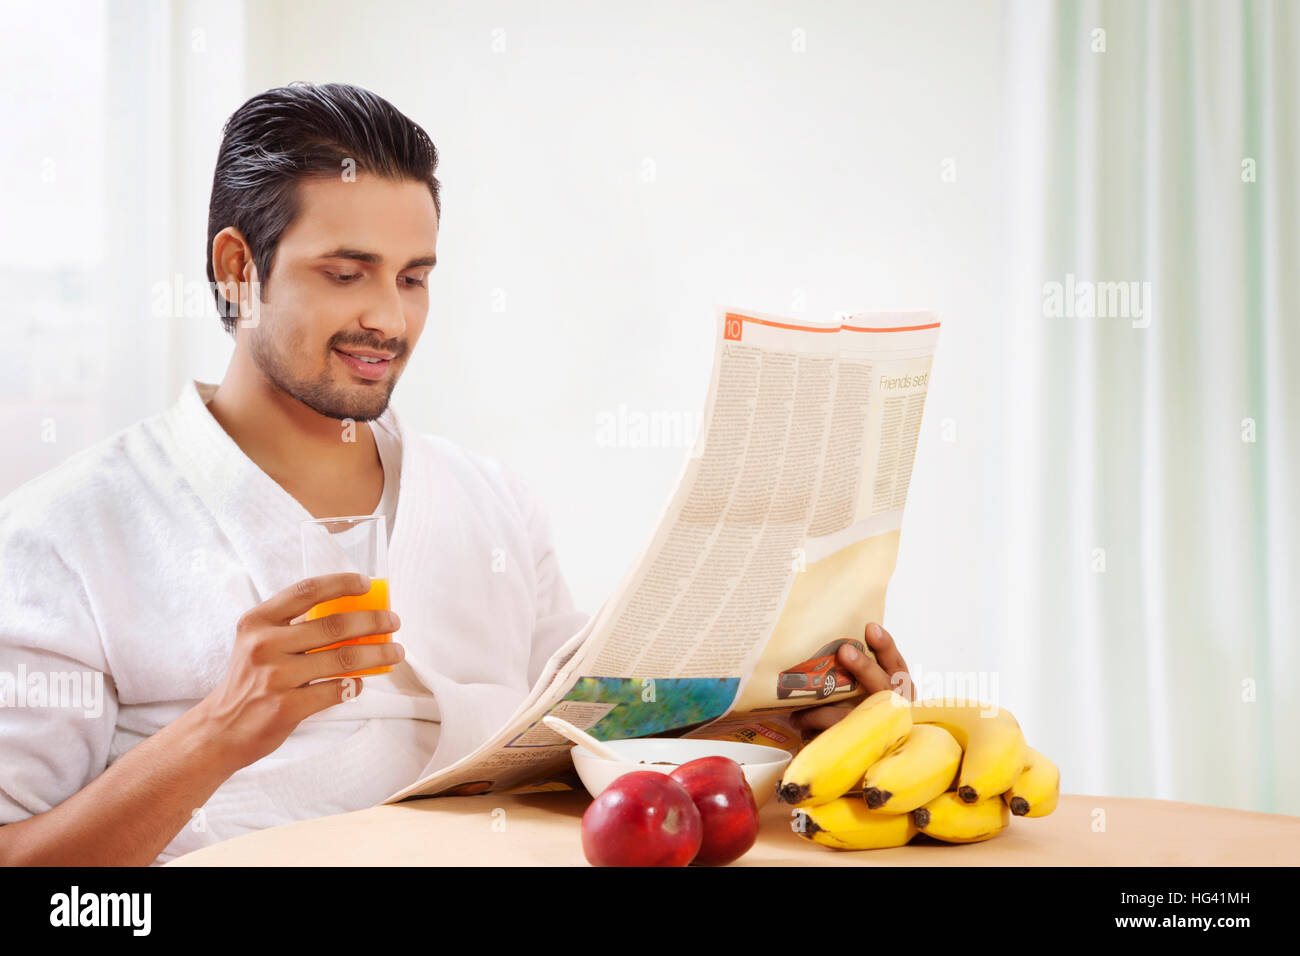 Portrait of man reading newspaper at breakfast table Stock Photo